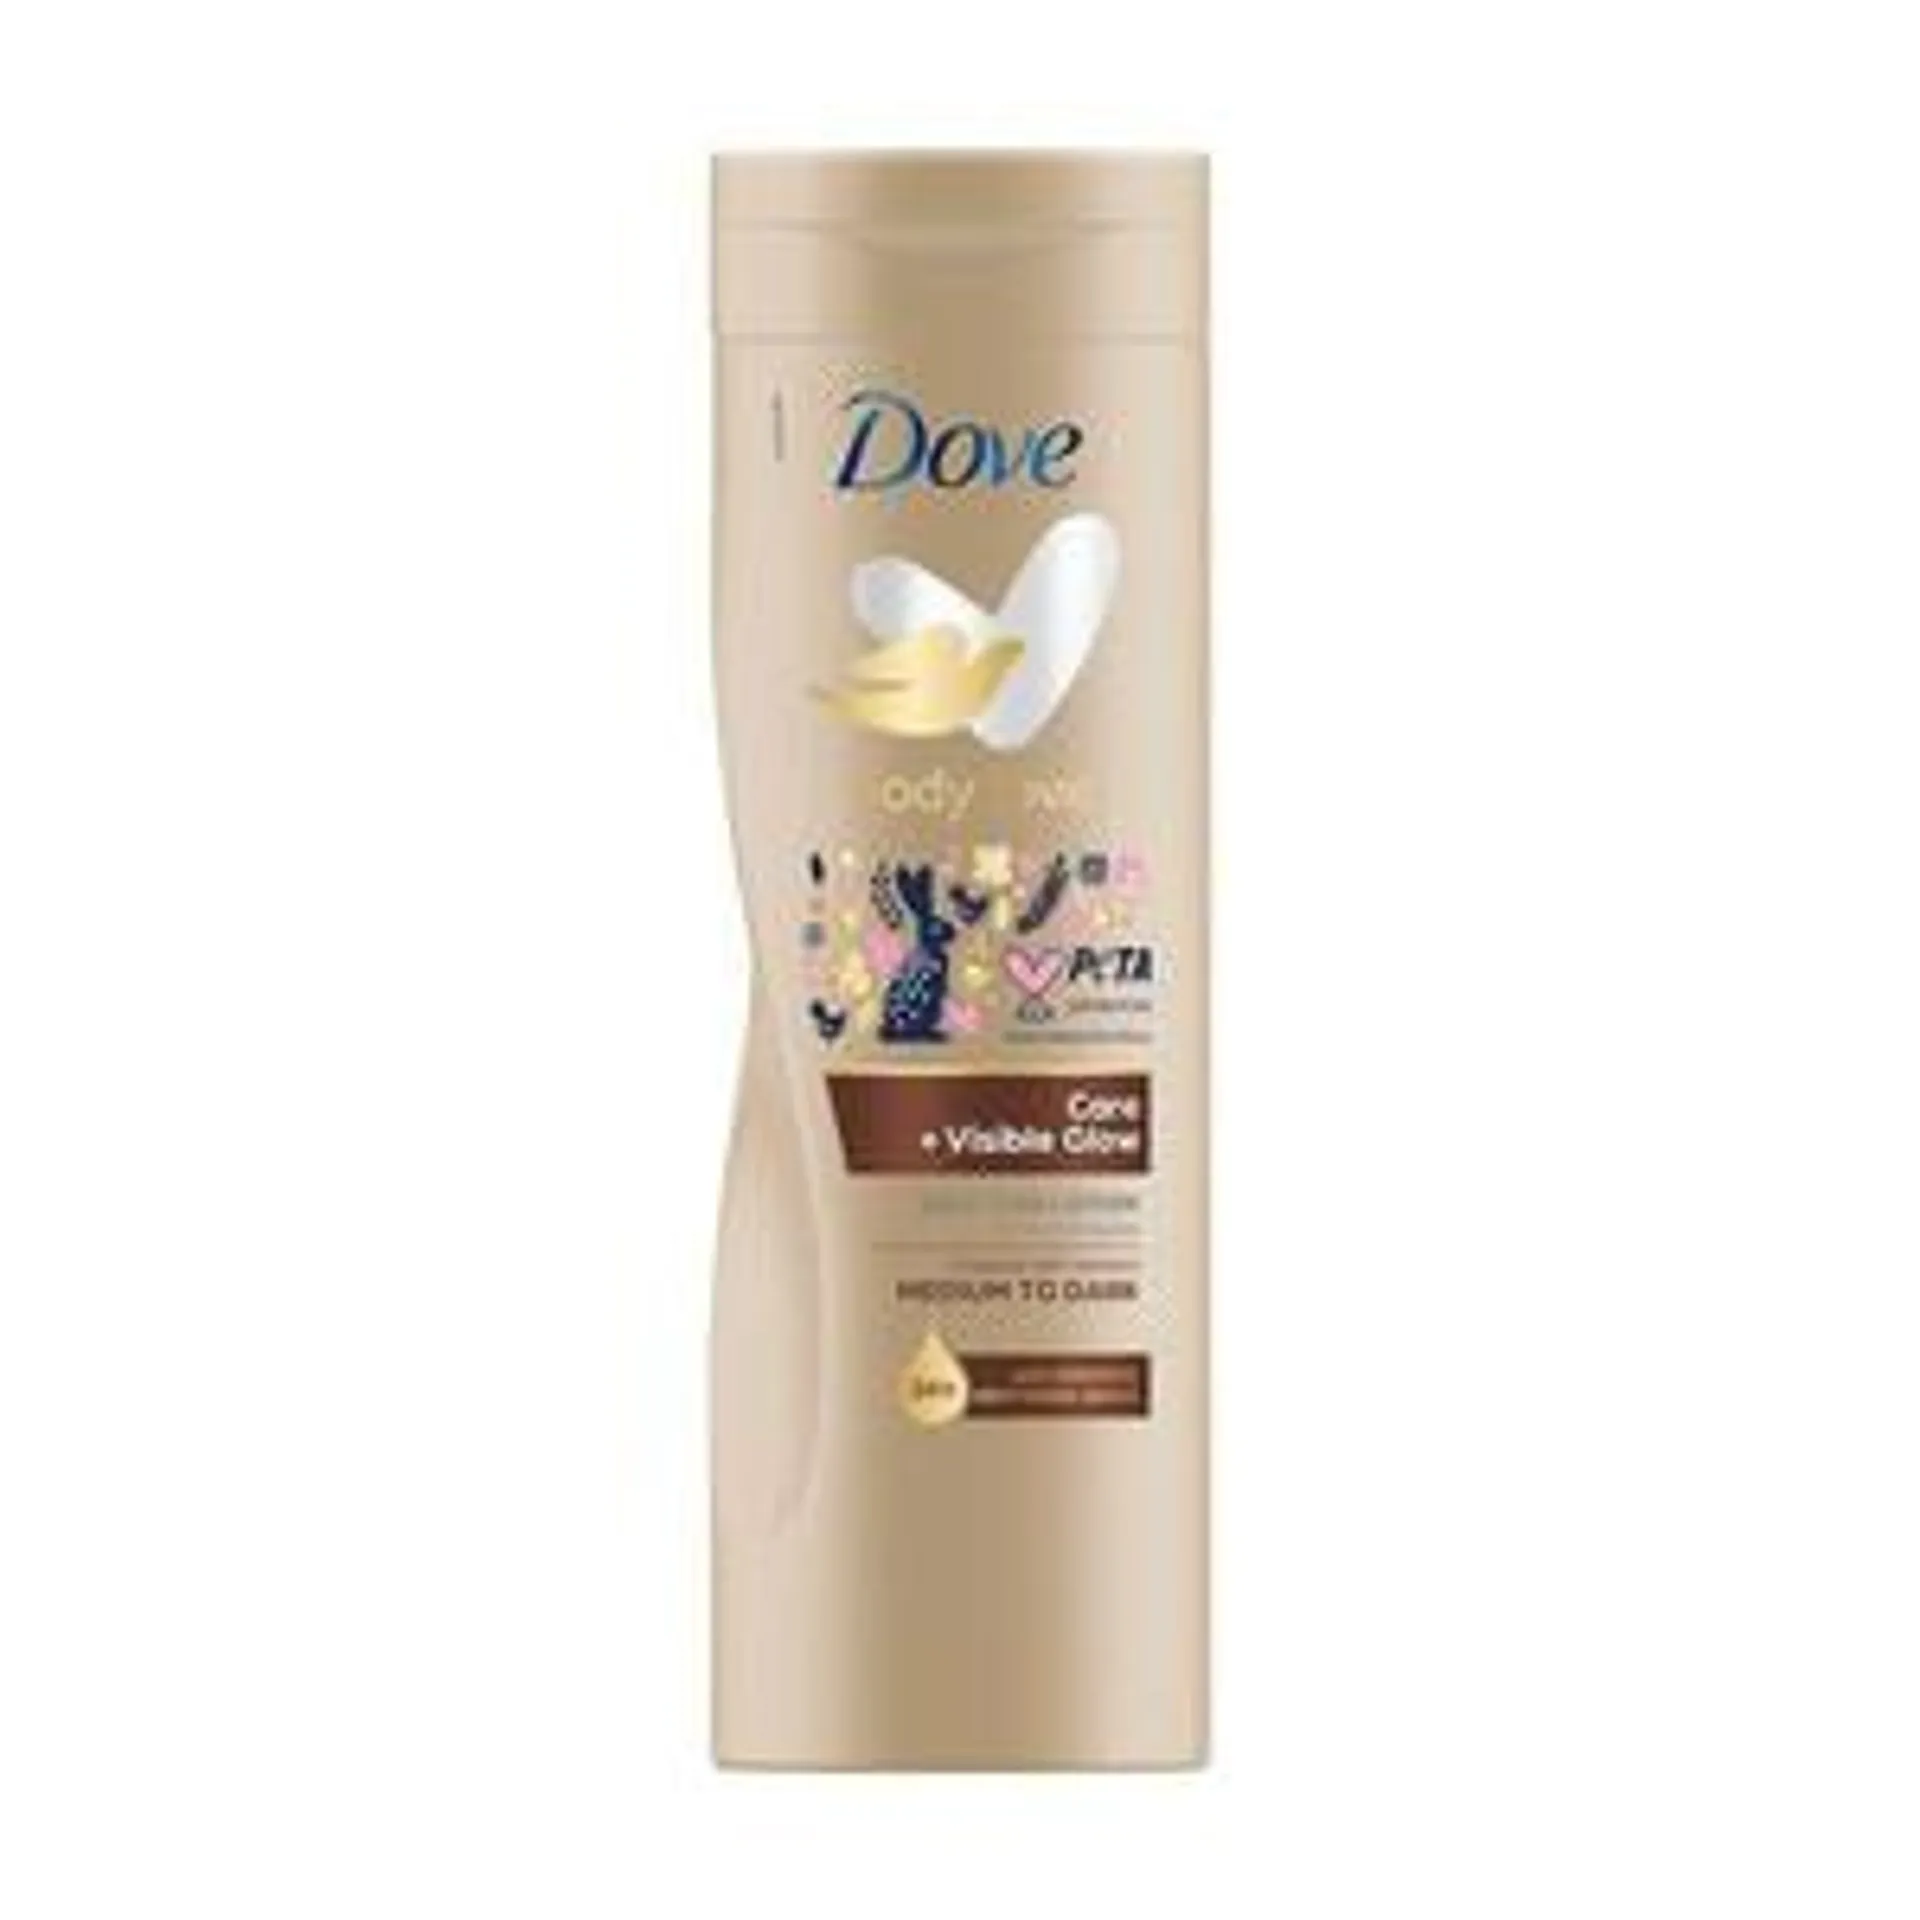 Dove Lotion Visible Glow Med - Dark 400ml